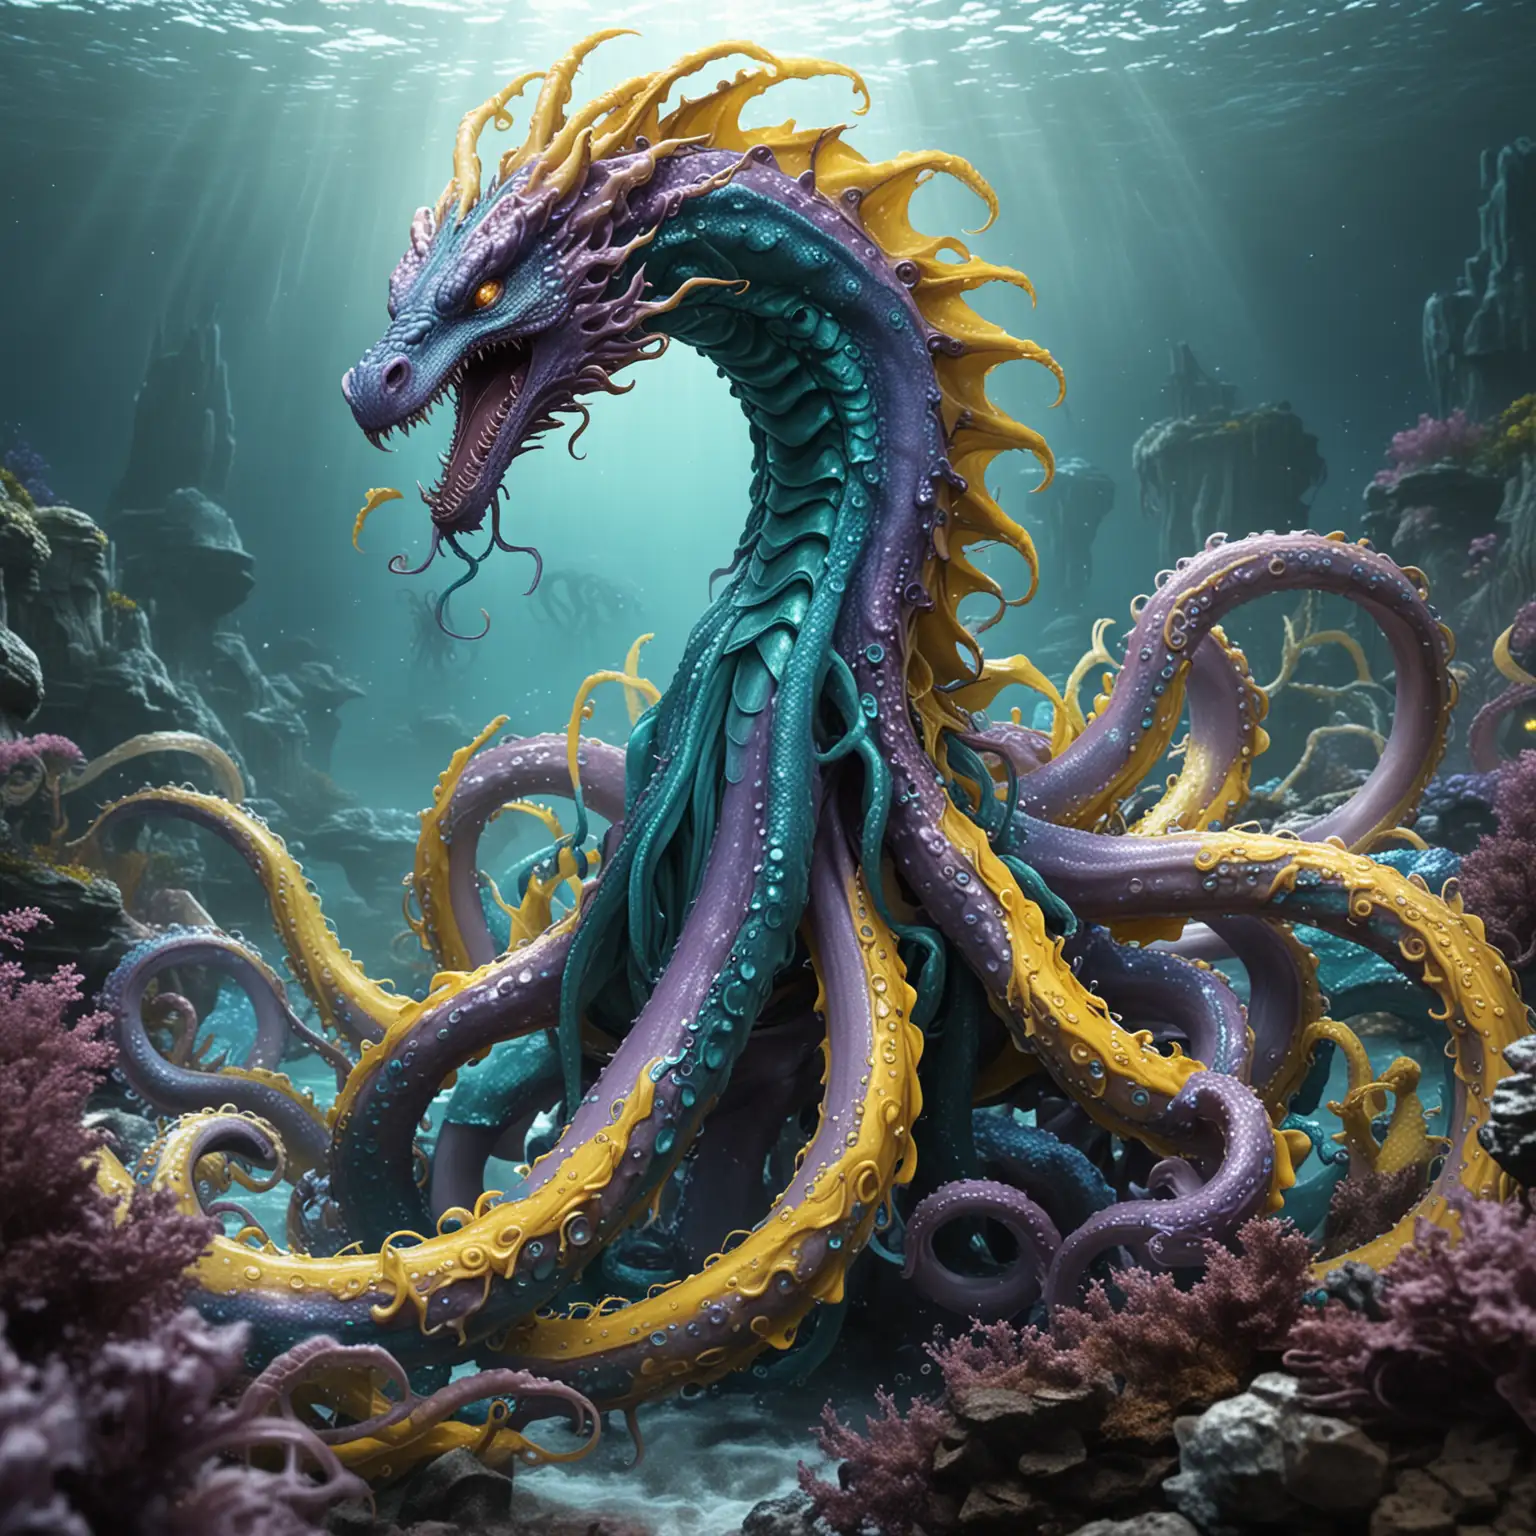 Epic Tentacle Dragon in Vibrant Blue and Teal Landscape